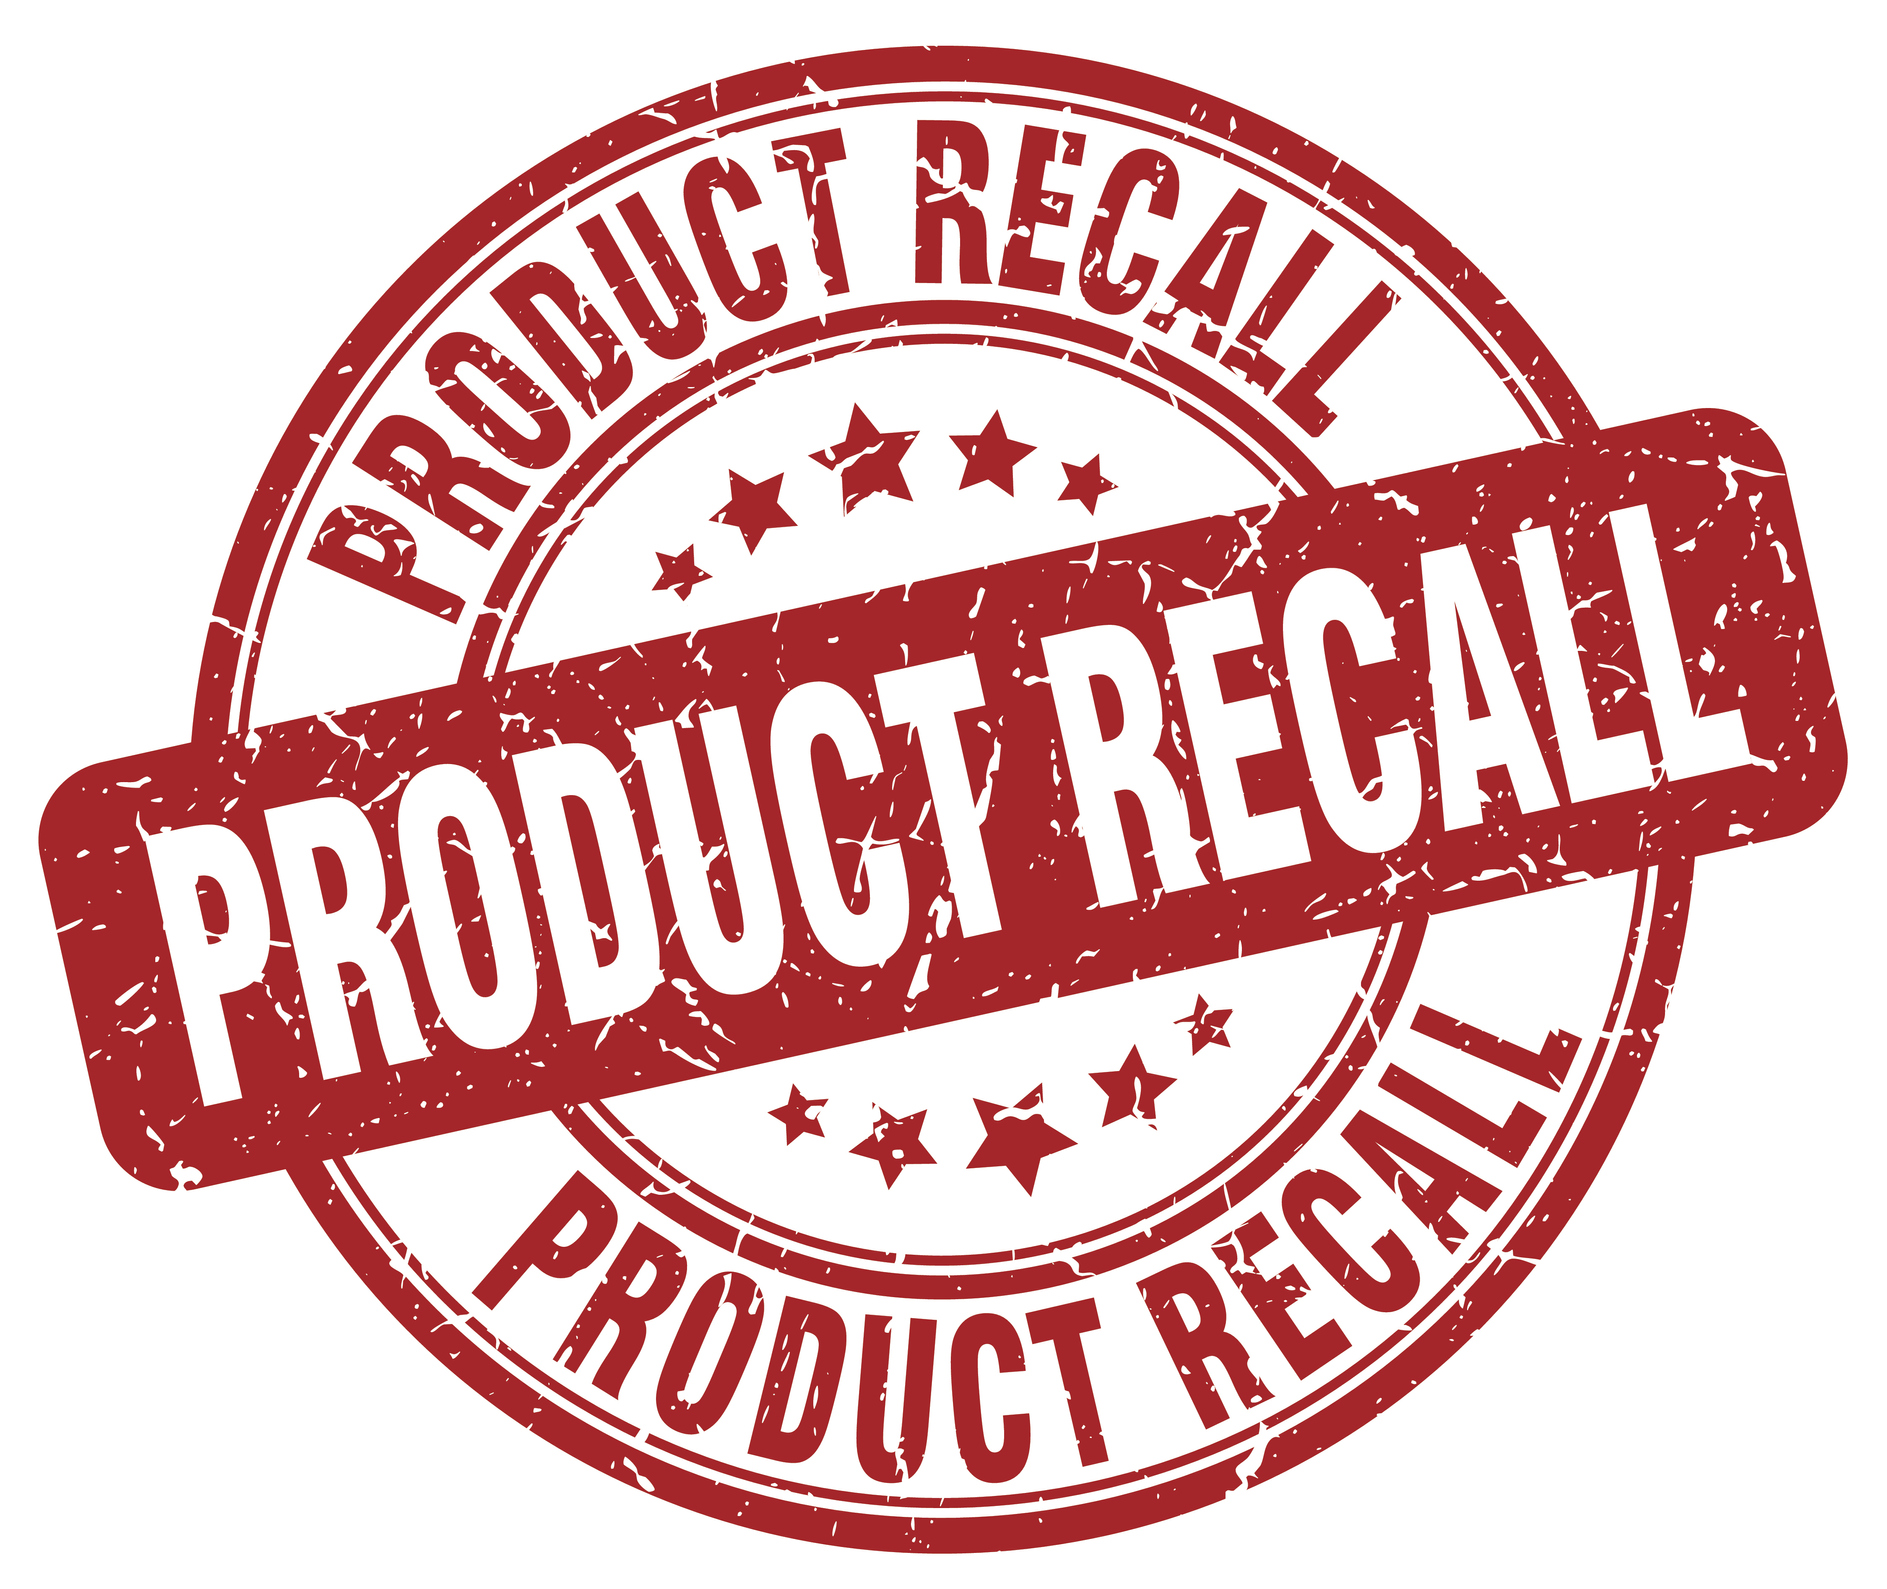 product recall red grunge round vintage rubber stamp